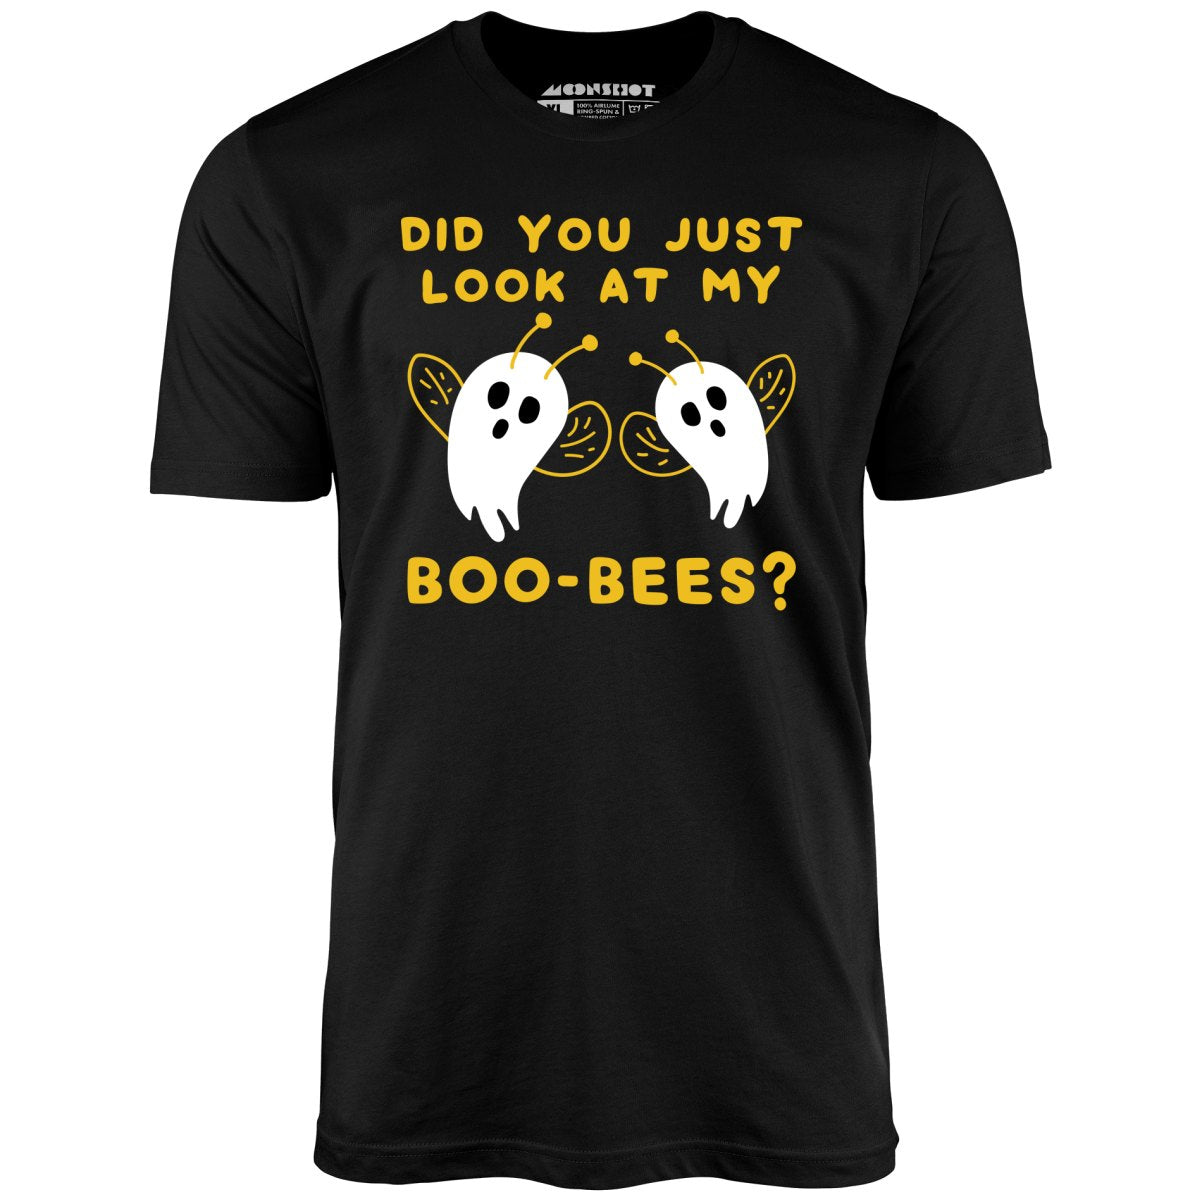 Did You Just Look At My Boo-Bees? - Unisex T-Shirt